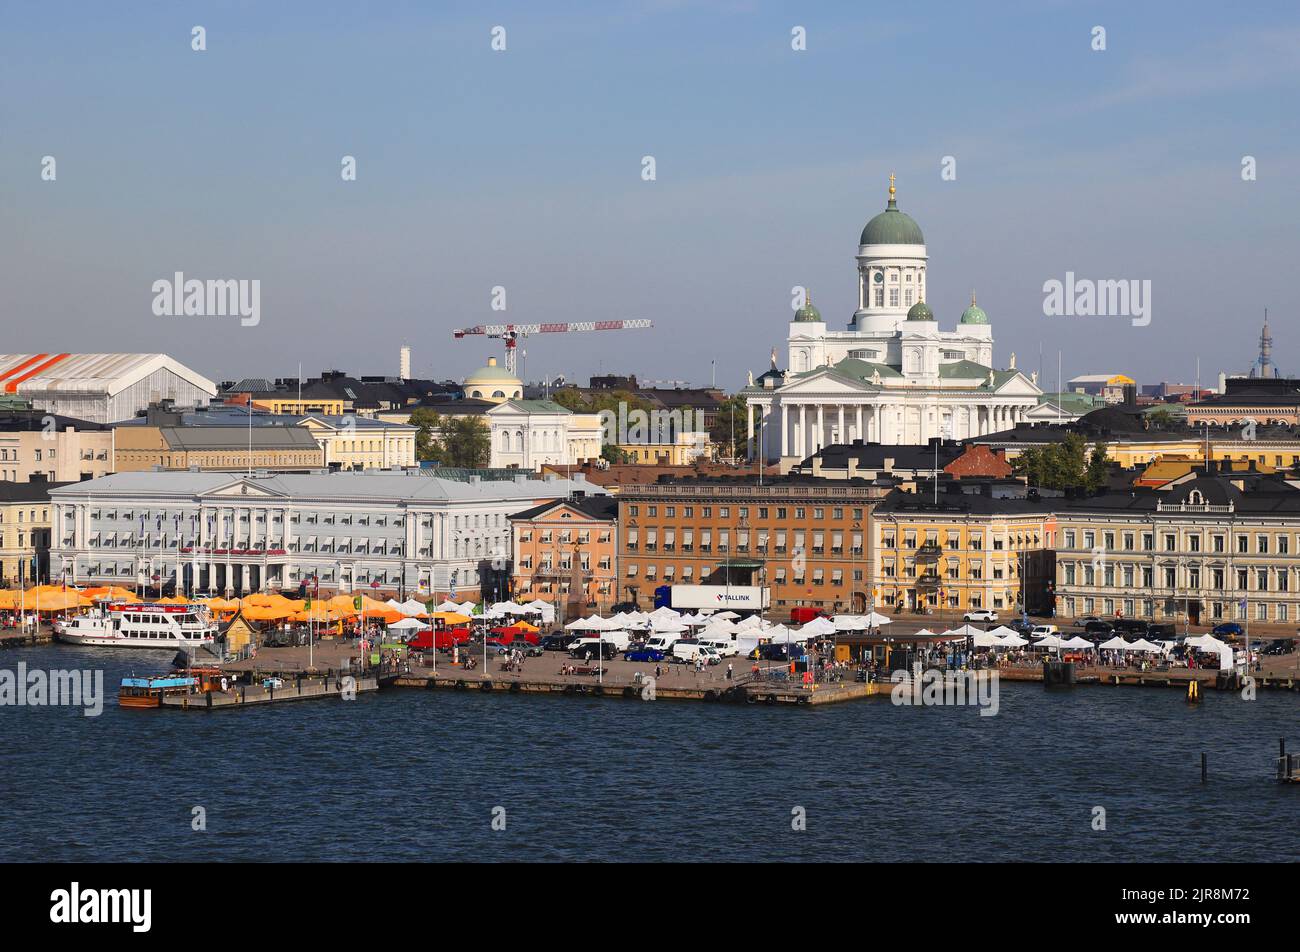 Helsinki, Finland - August 20, 2022: View of Helsinki and the cathedral seen from harbor. Stock Photo